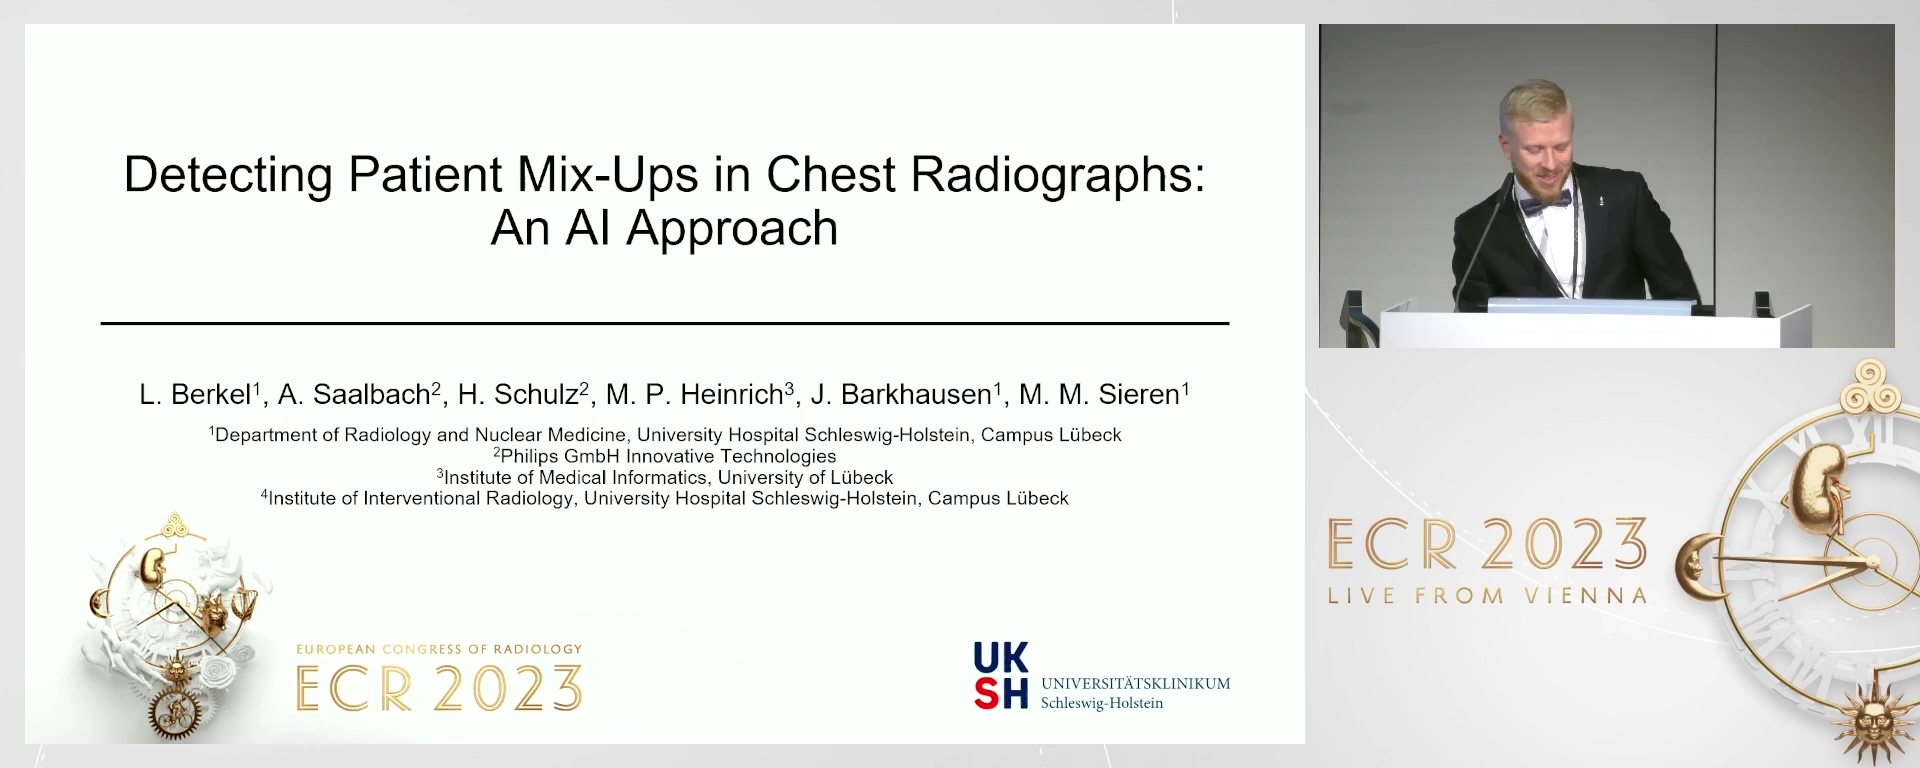 Detecting patient mix-ups in chest radiographs: an artificial intelligence approach